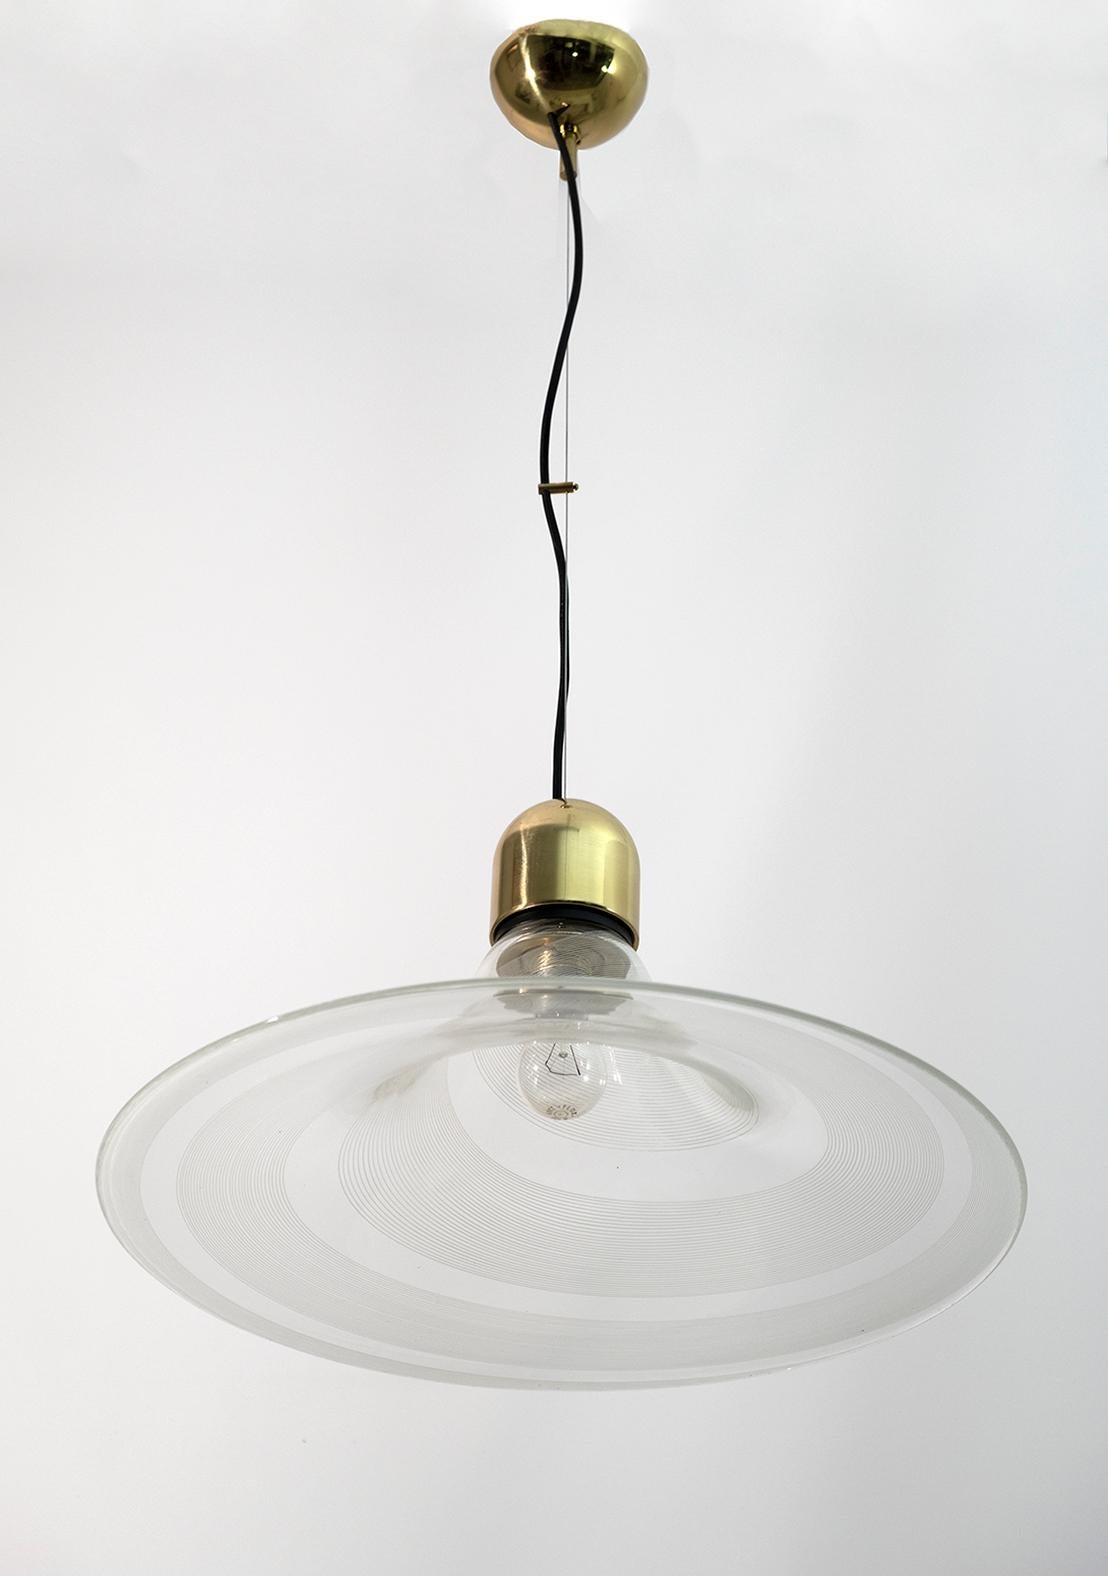 Superb pendant lamp in Murano glass, produced by Masters of Murano, blown glass processing technique, spiral shape.